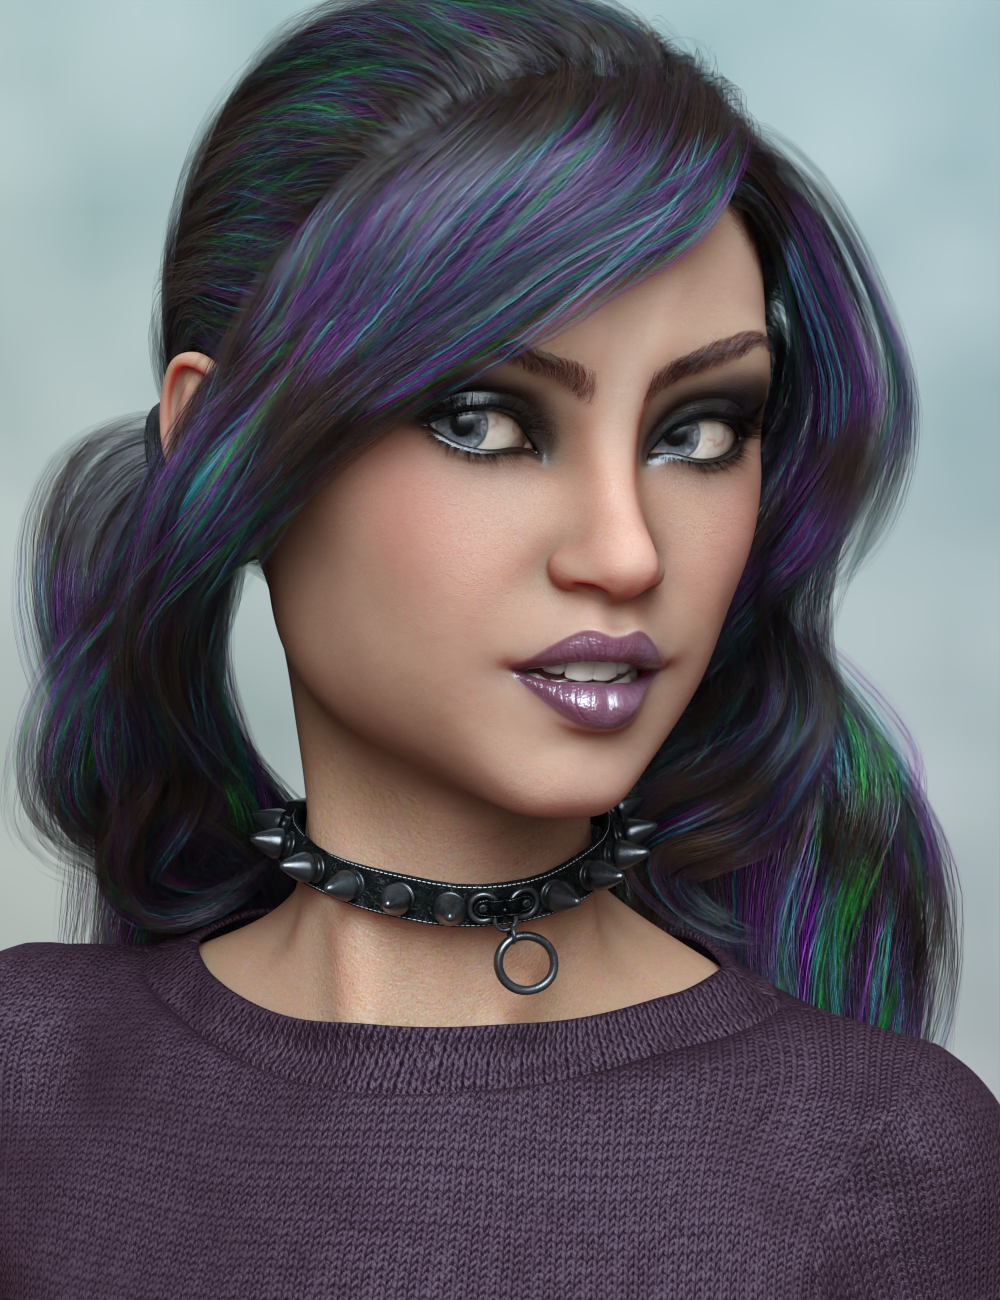 Narcissa for Teen Raven 8 by: 3DSublimeProductionsVex, 3D Models by Daz 3D